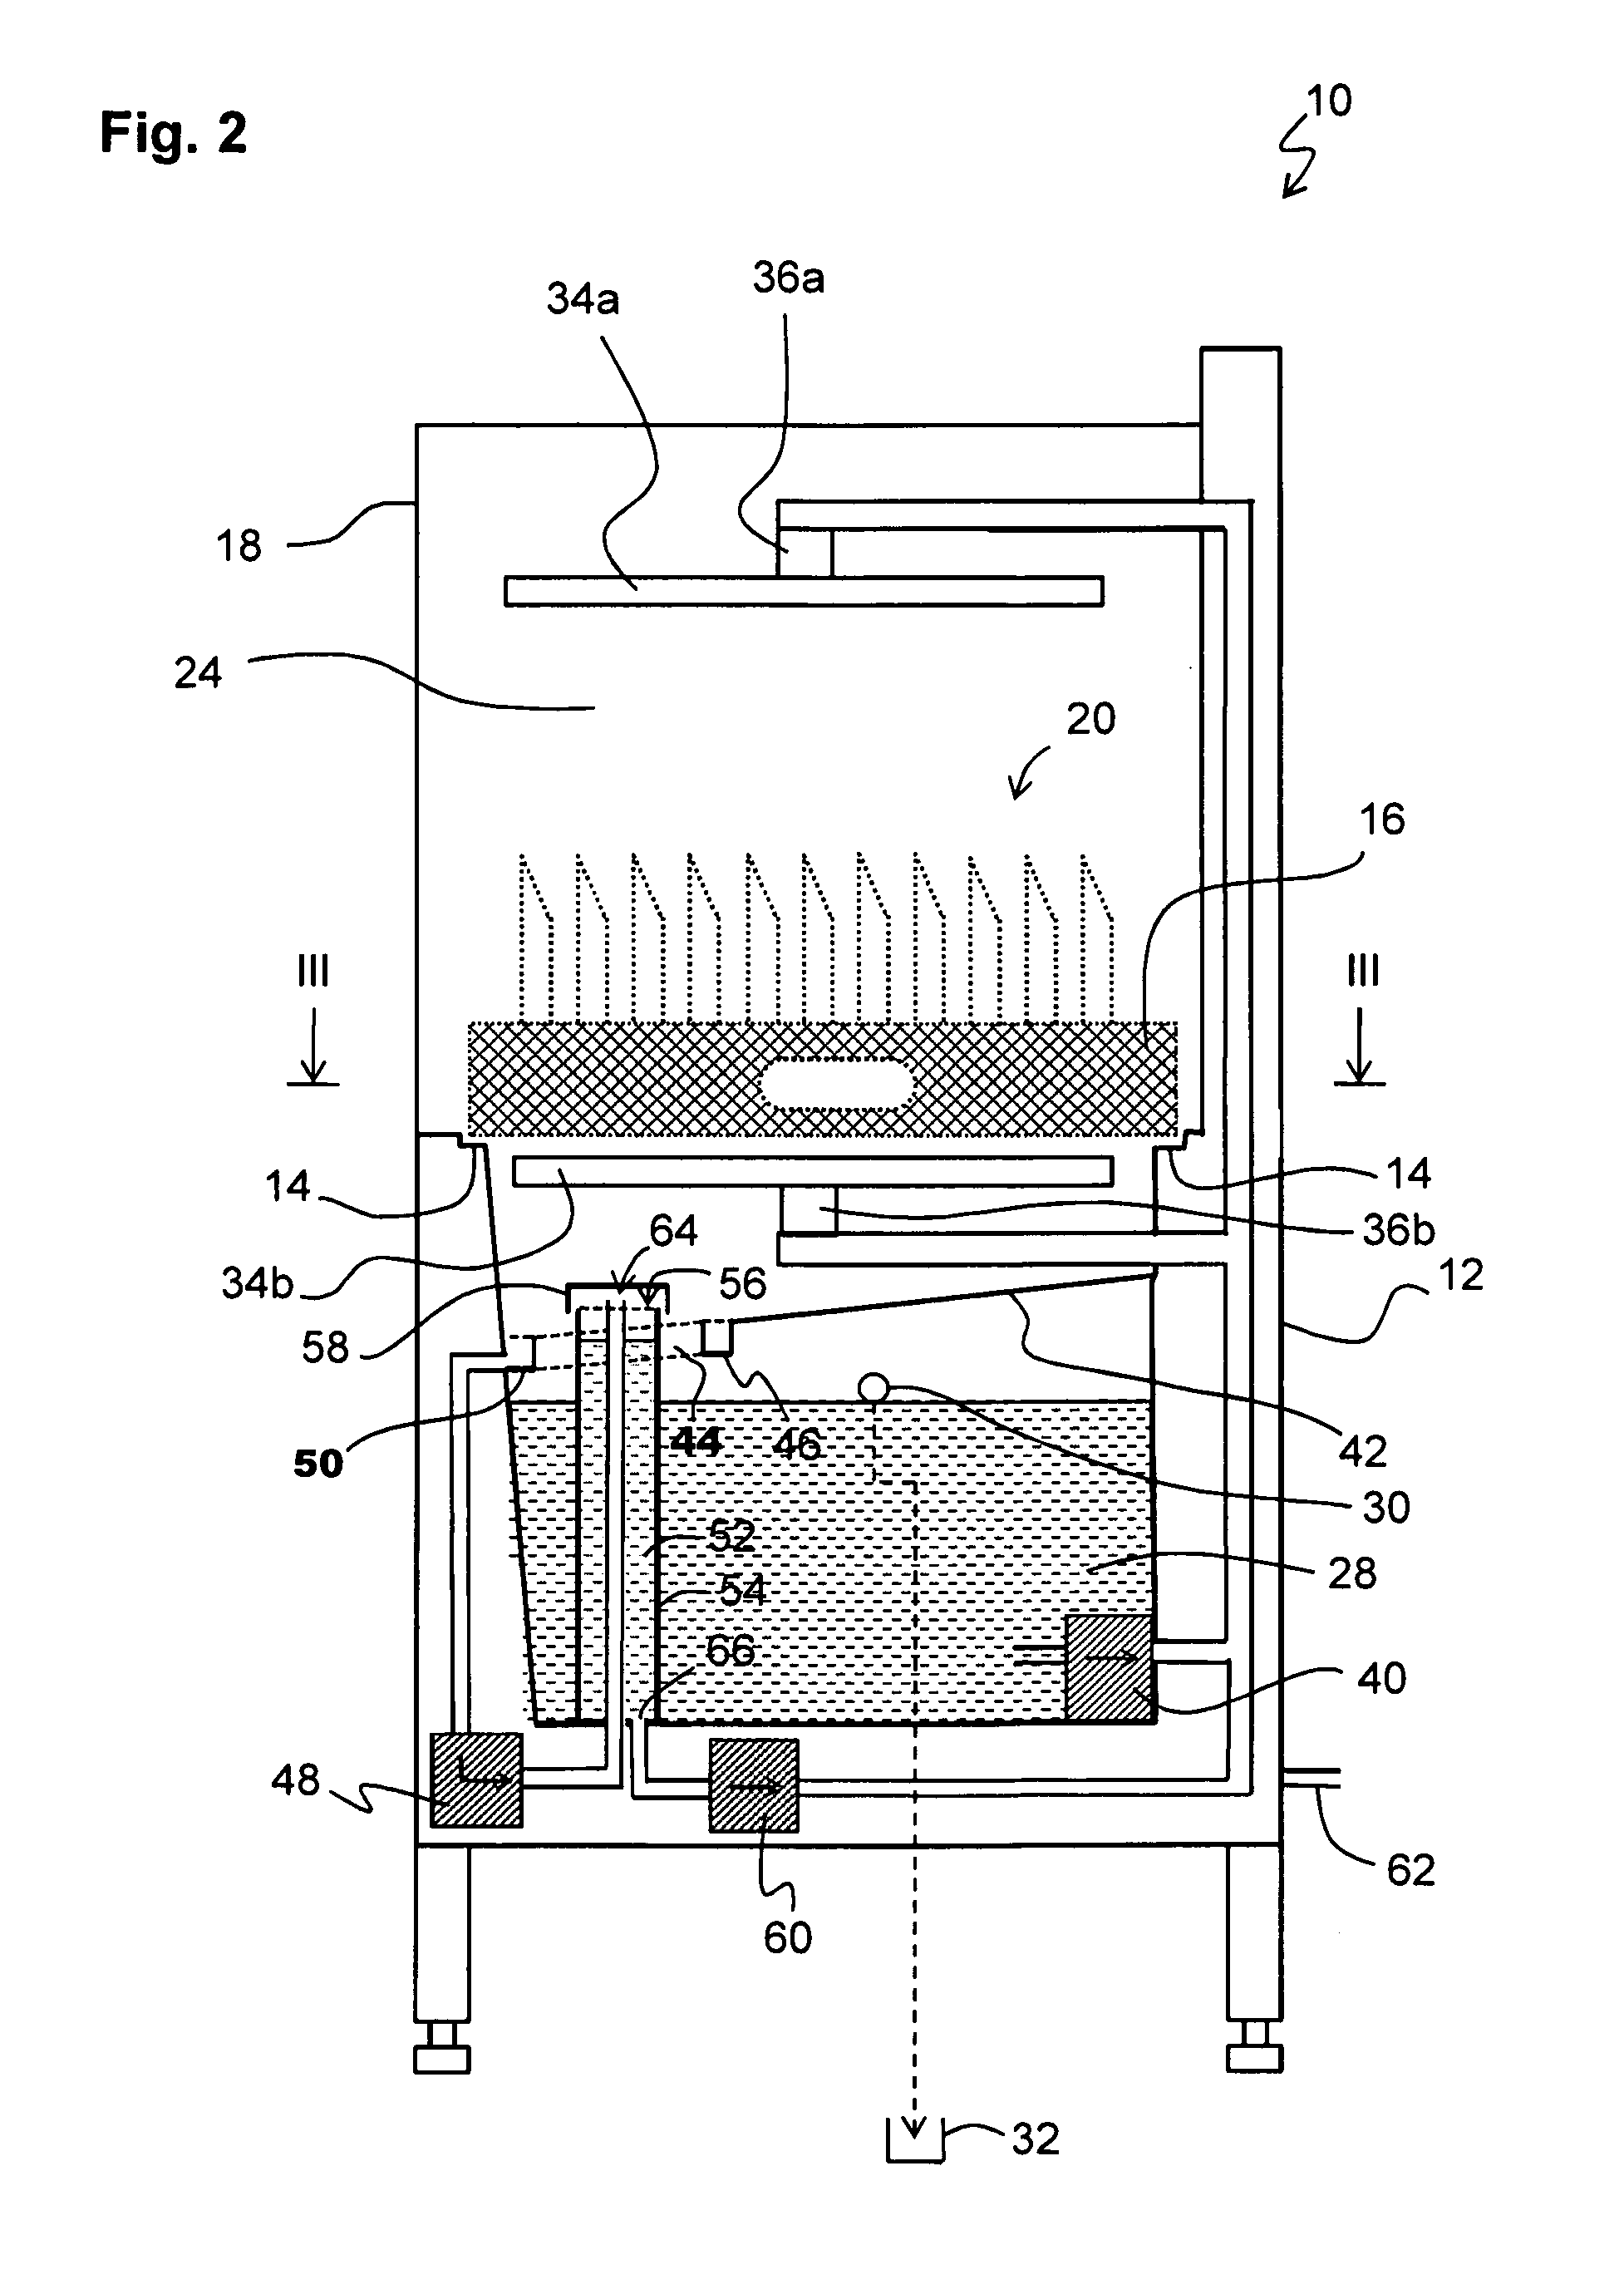 Dishwasher, and process for rinsing of wash items